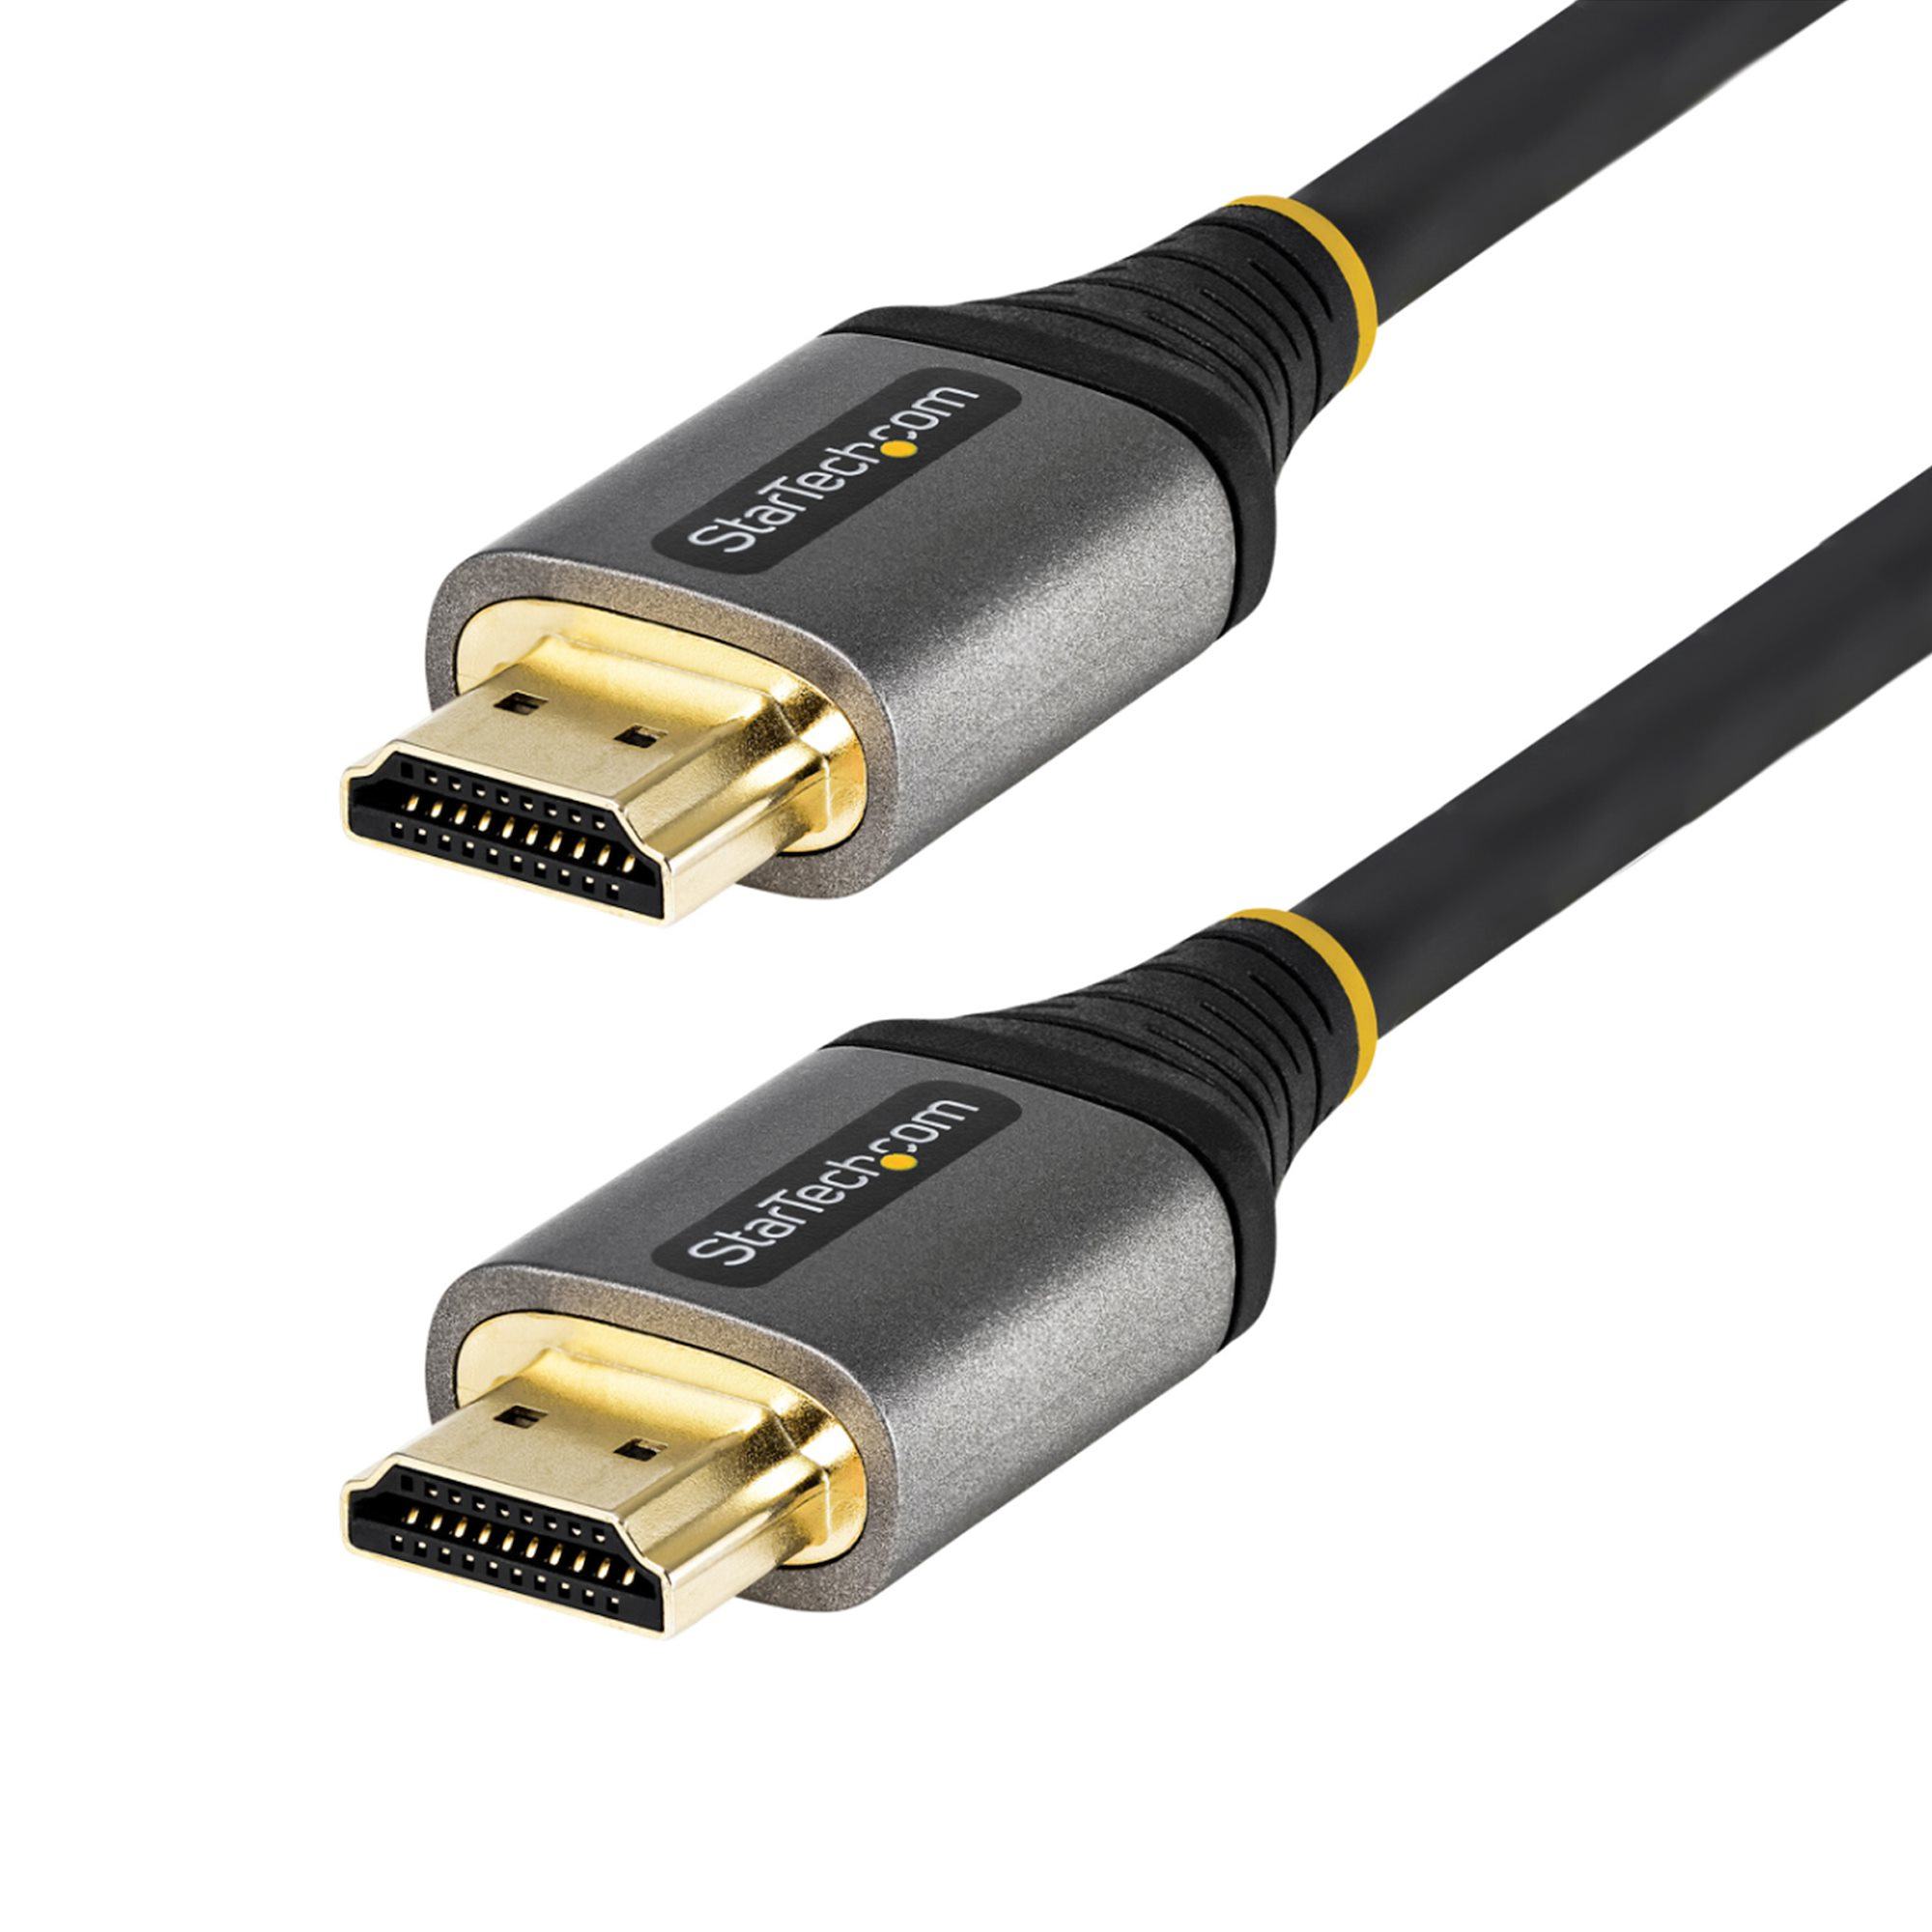 StarTech.com 16ft (5m) Premium Certified HDMI 2.0 Cable - High-Speed Ultra HD 4K 60Hz HDMI Cable with Ethernet - HDR10, ARC - UHD HDMI Video Cord - For UHD Monitors, TVs, Displays - M/M - Premium Highspeed - HDMI-Kabel mit Ethernet - HDMI männlich zu HD